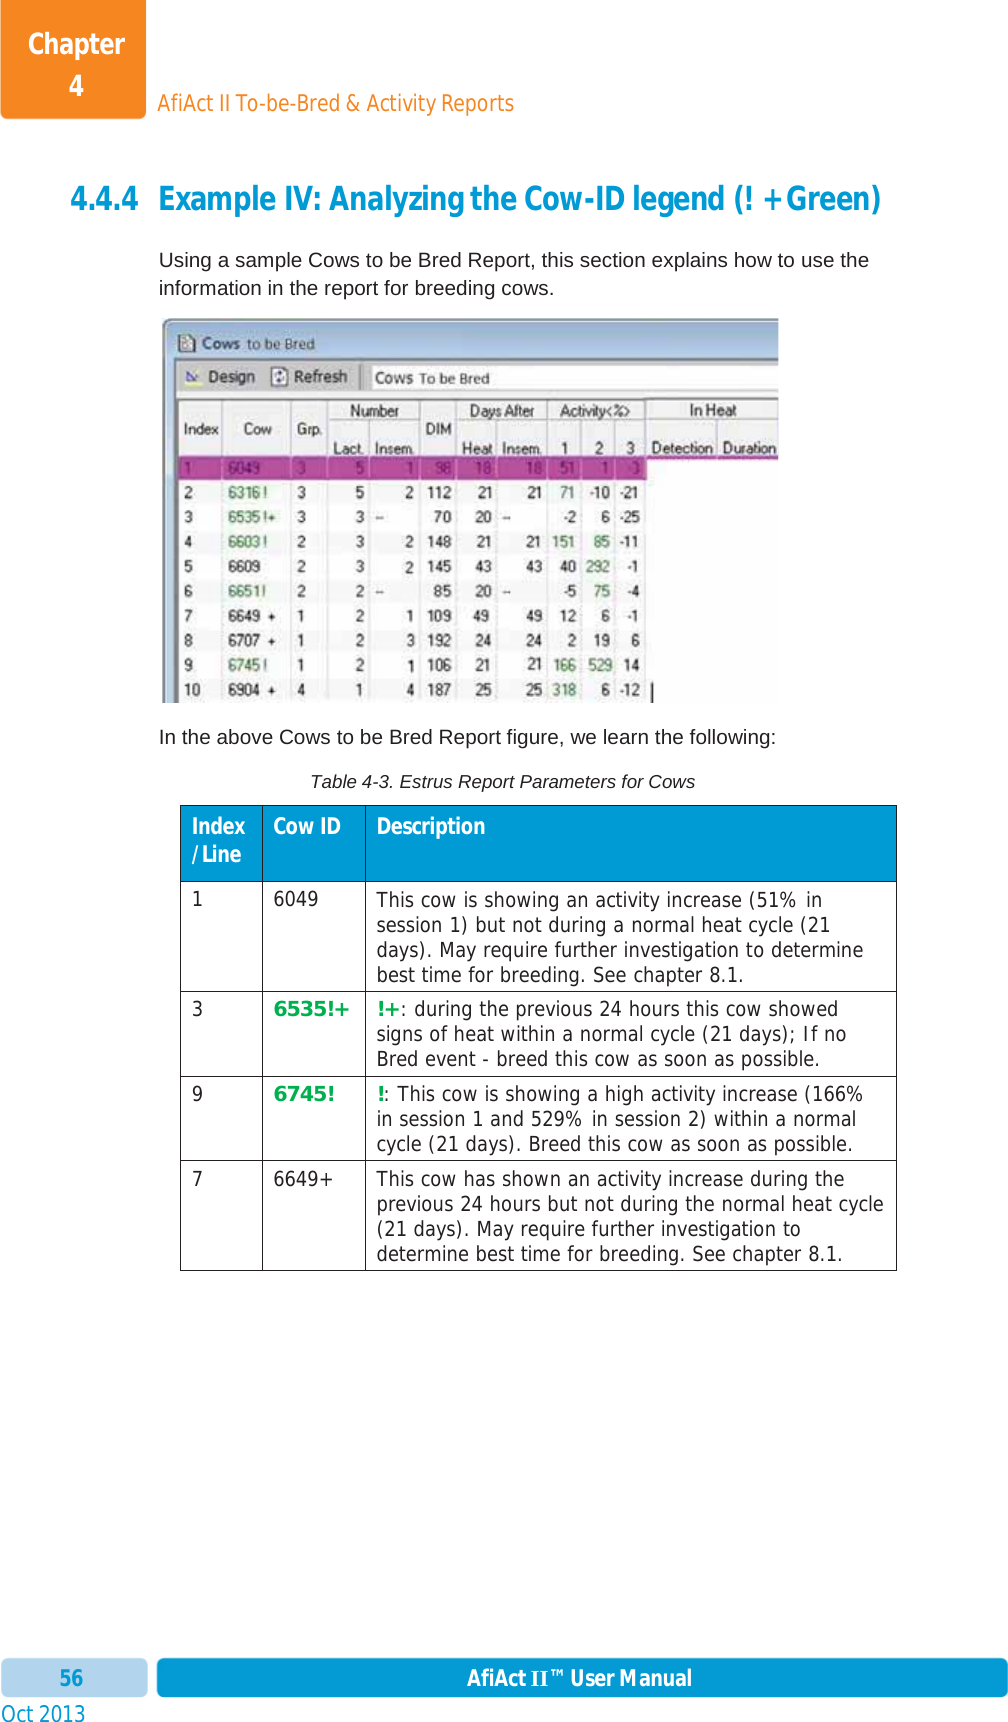 Oct 2013 AfiAct II™ User Manual56AfiAct II To-be-Bred &amp; Activity ReportsChapter 44.4.4 Example IV: Analyzing the Cow-ID legend (! + Green)  Using a sample Cows to be Bred Report, this section explains how to use the information in the report for breeding cows. In the above Cows to be Bred Report figure, we learn the following: Table 4-3. Estrus Report Parameters for Cows Index/Line  Cow ID  Description 1 6049 This cow is showing an activity increase (51% in session 1) but not during a normal heat cycle (21 days). May require further investigation to determine best time for breeding. See chapter  8.1. 36535!+  !+: during the previous 24 hours this cow showed signs of heat within a normal cycle (21 days); If no Bred event - breed this cow as soon as possible.  96745! !: This cow is showing a high activity increase (166% in session 1 and 529% in session 2) within a normal cycle (21 days). Breed this cow as soon as possible. 7 6649+ This cow has shown an activity increase during the previous 24 hours but not during the normal heat cycle (21 days). May require further investigation to determine best time for breeding. See chapter  8.1. 